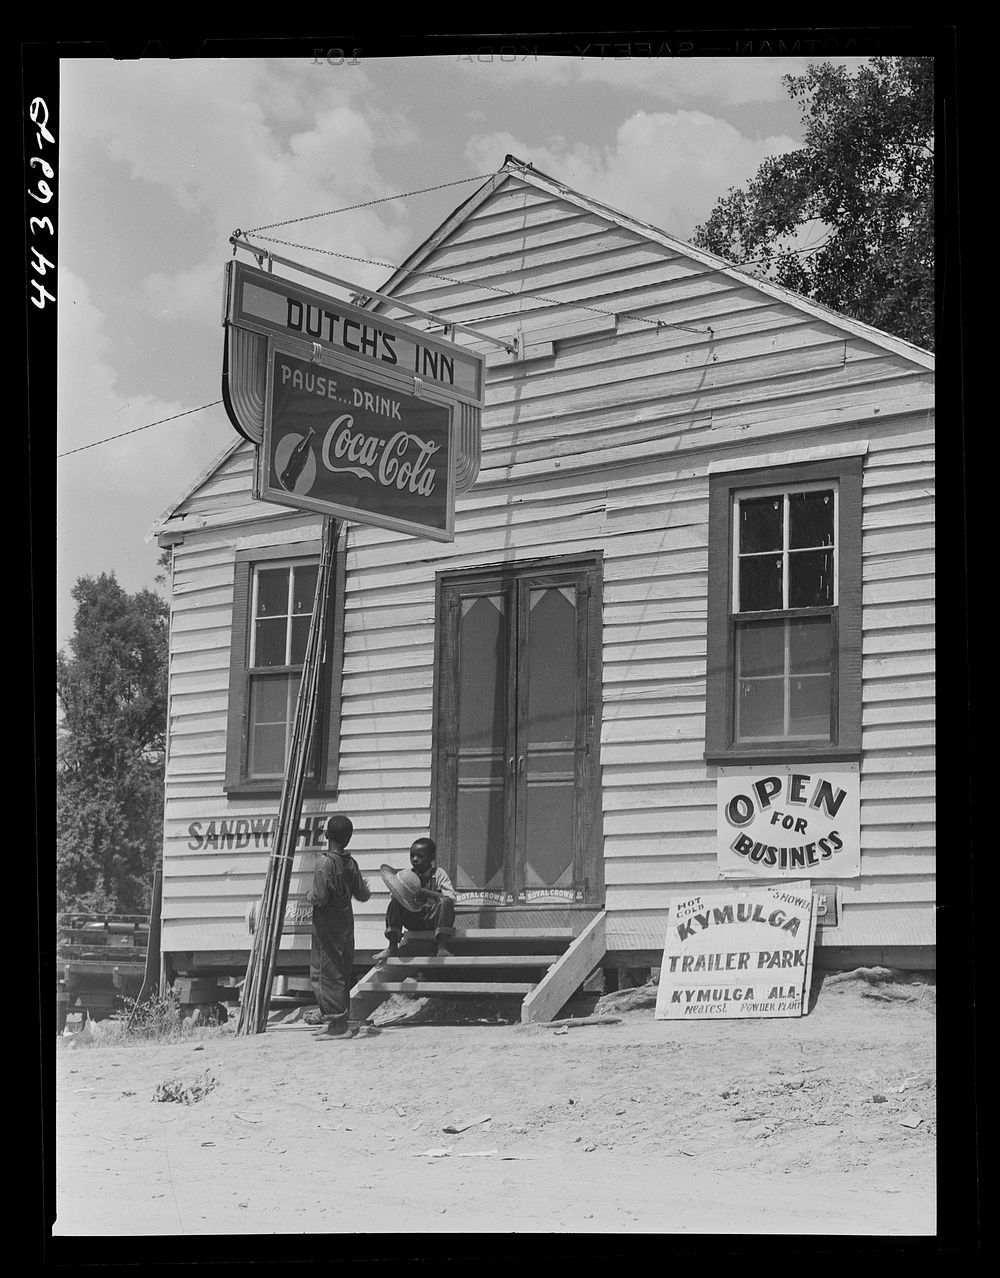 A new lunch room just opened at Kymulga, near one of the entrances to the powder plant. Near Childersburg, Alabama. Sourced…